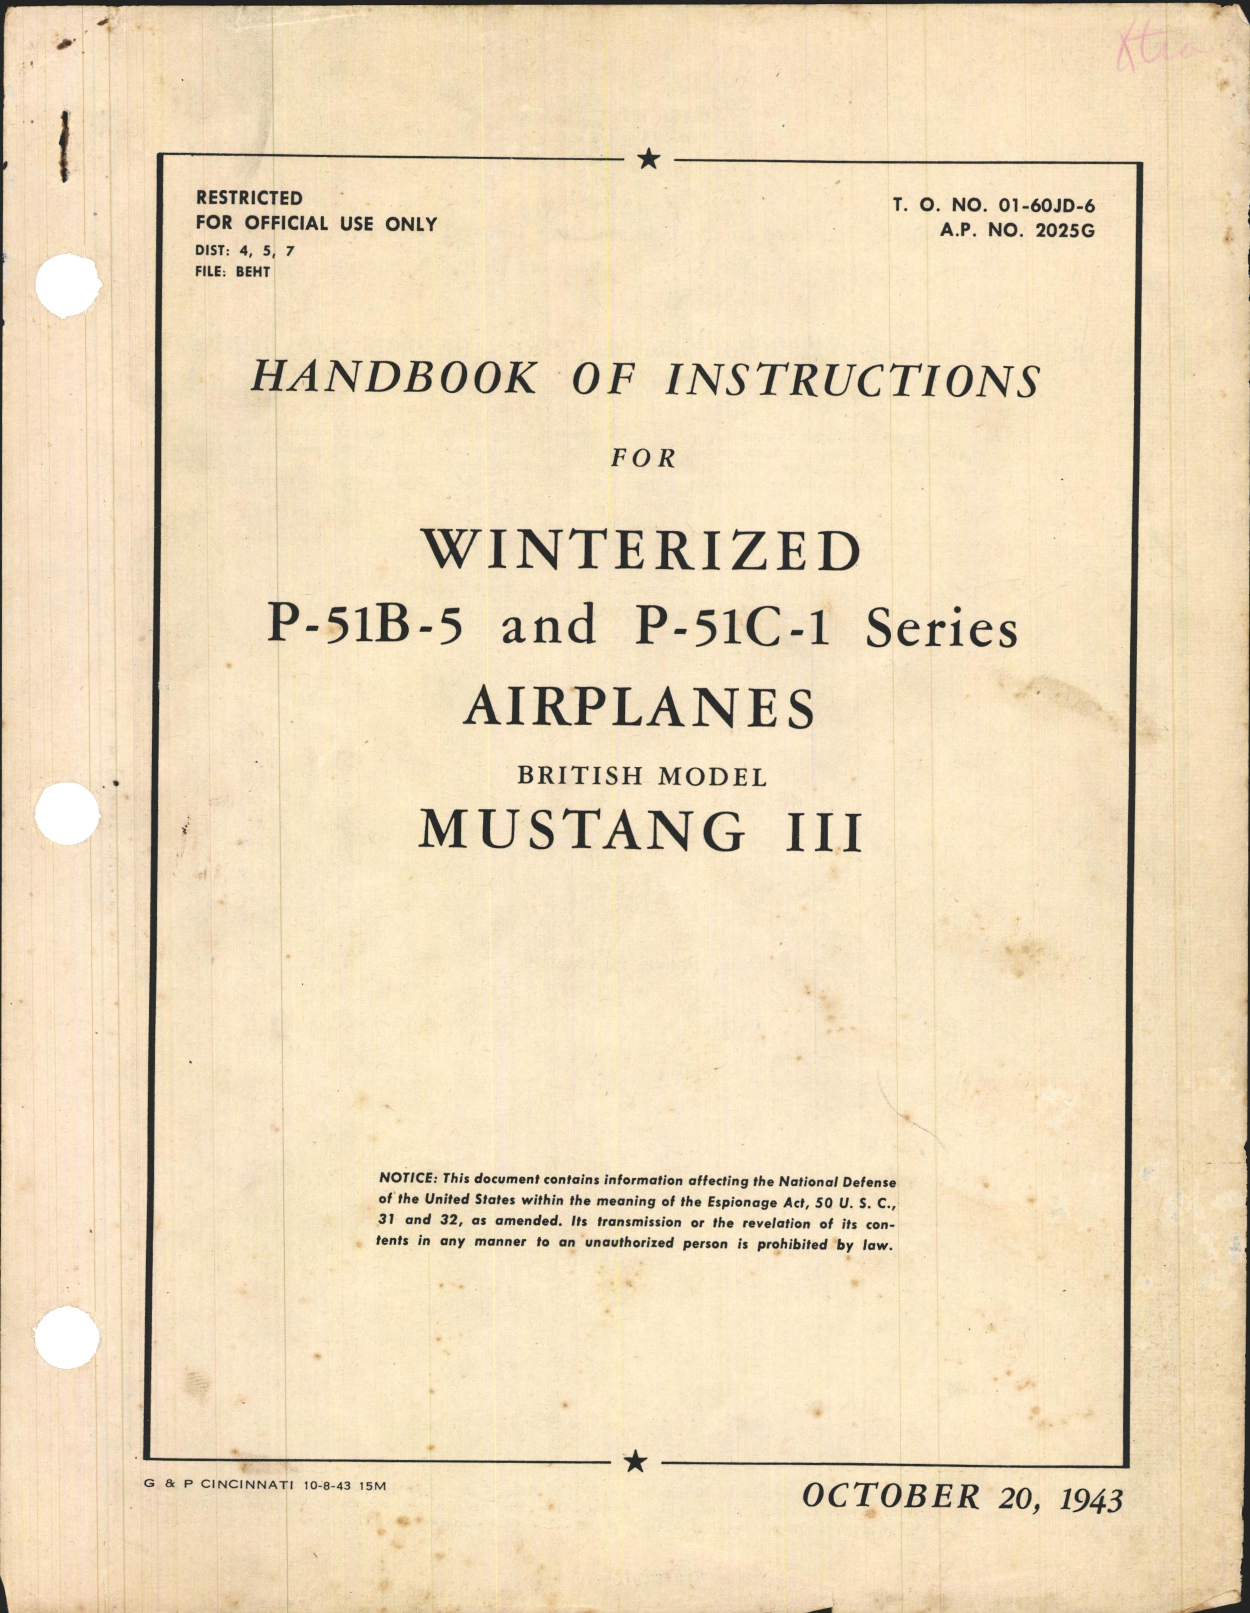 Sample page 1 from AirCorps Library document: Handbook of Instructions for Winterized P-51B-5 and P-51C-1 Series Airplanes